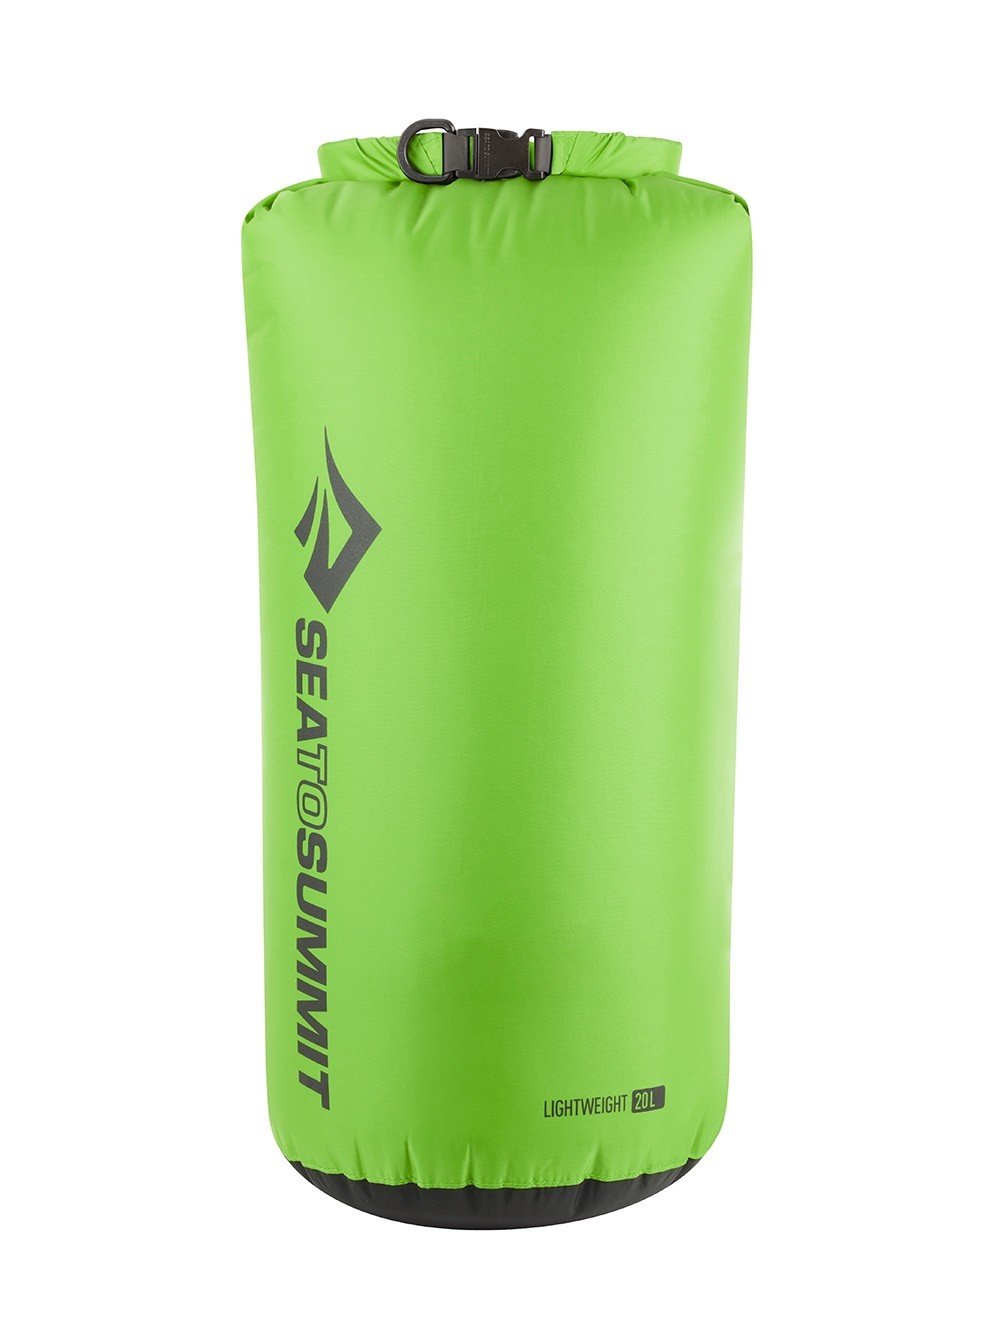 Sea To Summit Lightweight 70D 20 Litres Dry Sack Bags, Packs and Cases Sea To Summit Green Tactical Gear Supplier Tactical Distributors Australia